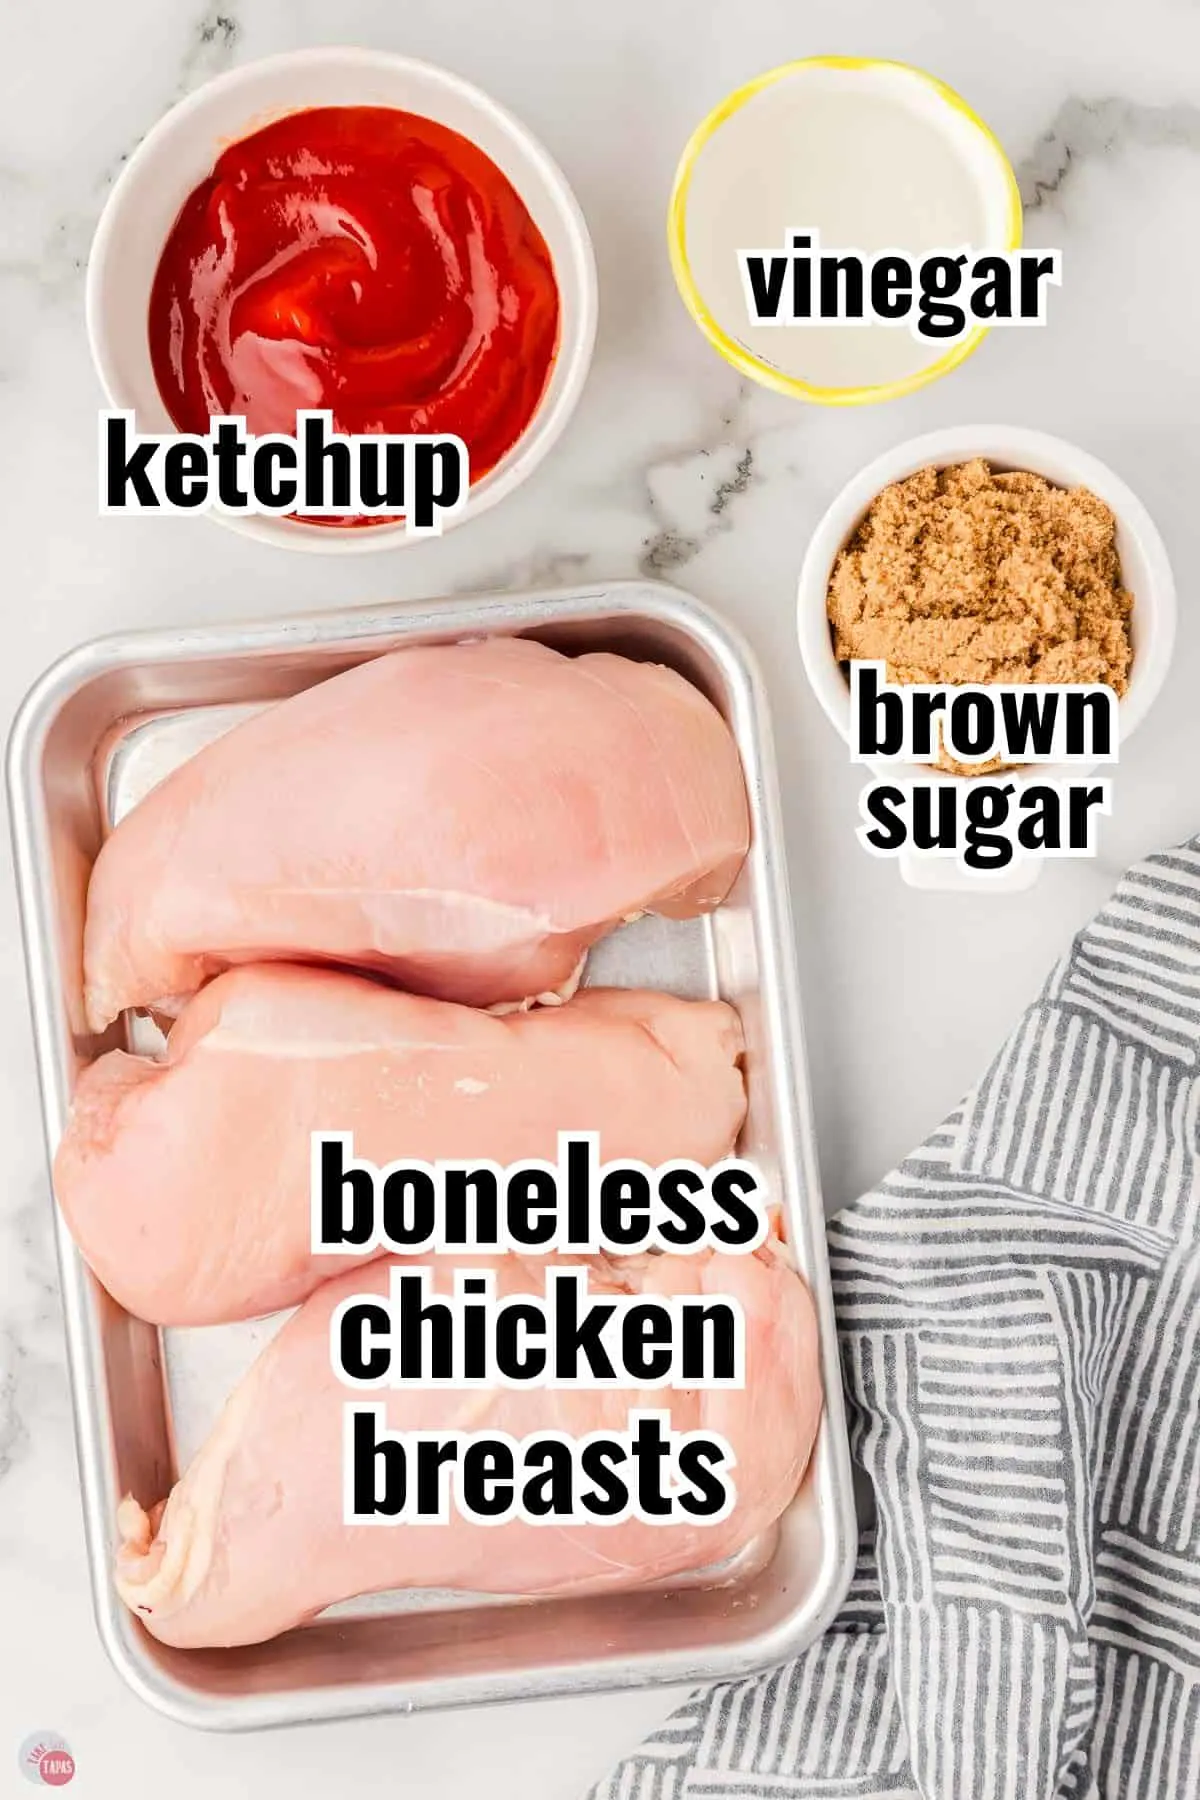 bbq sauce ingredients and chicken for a simple recipe